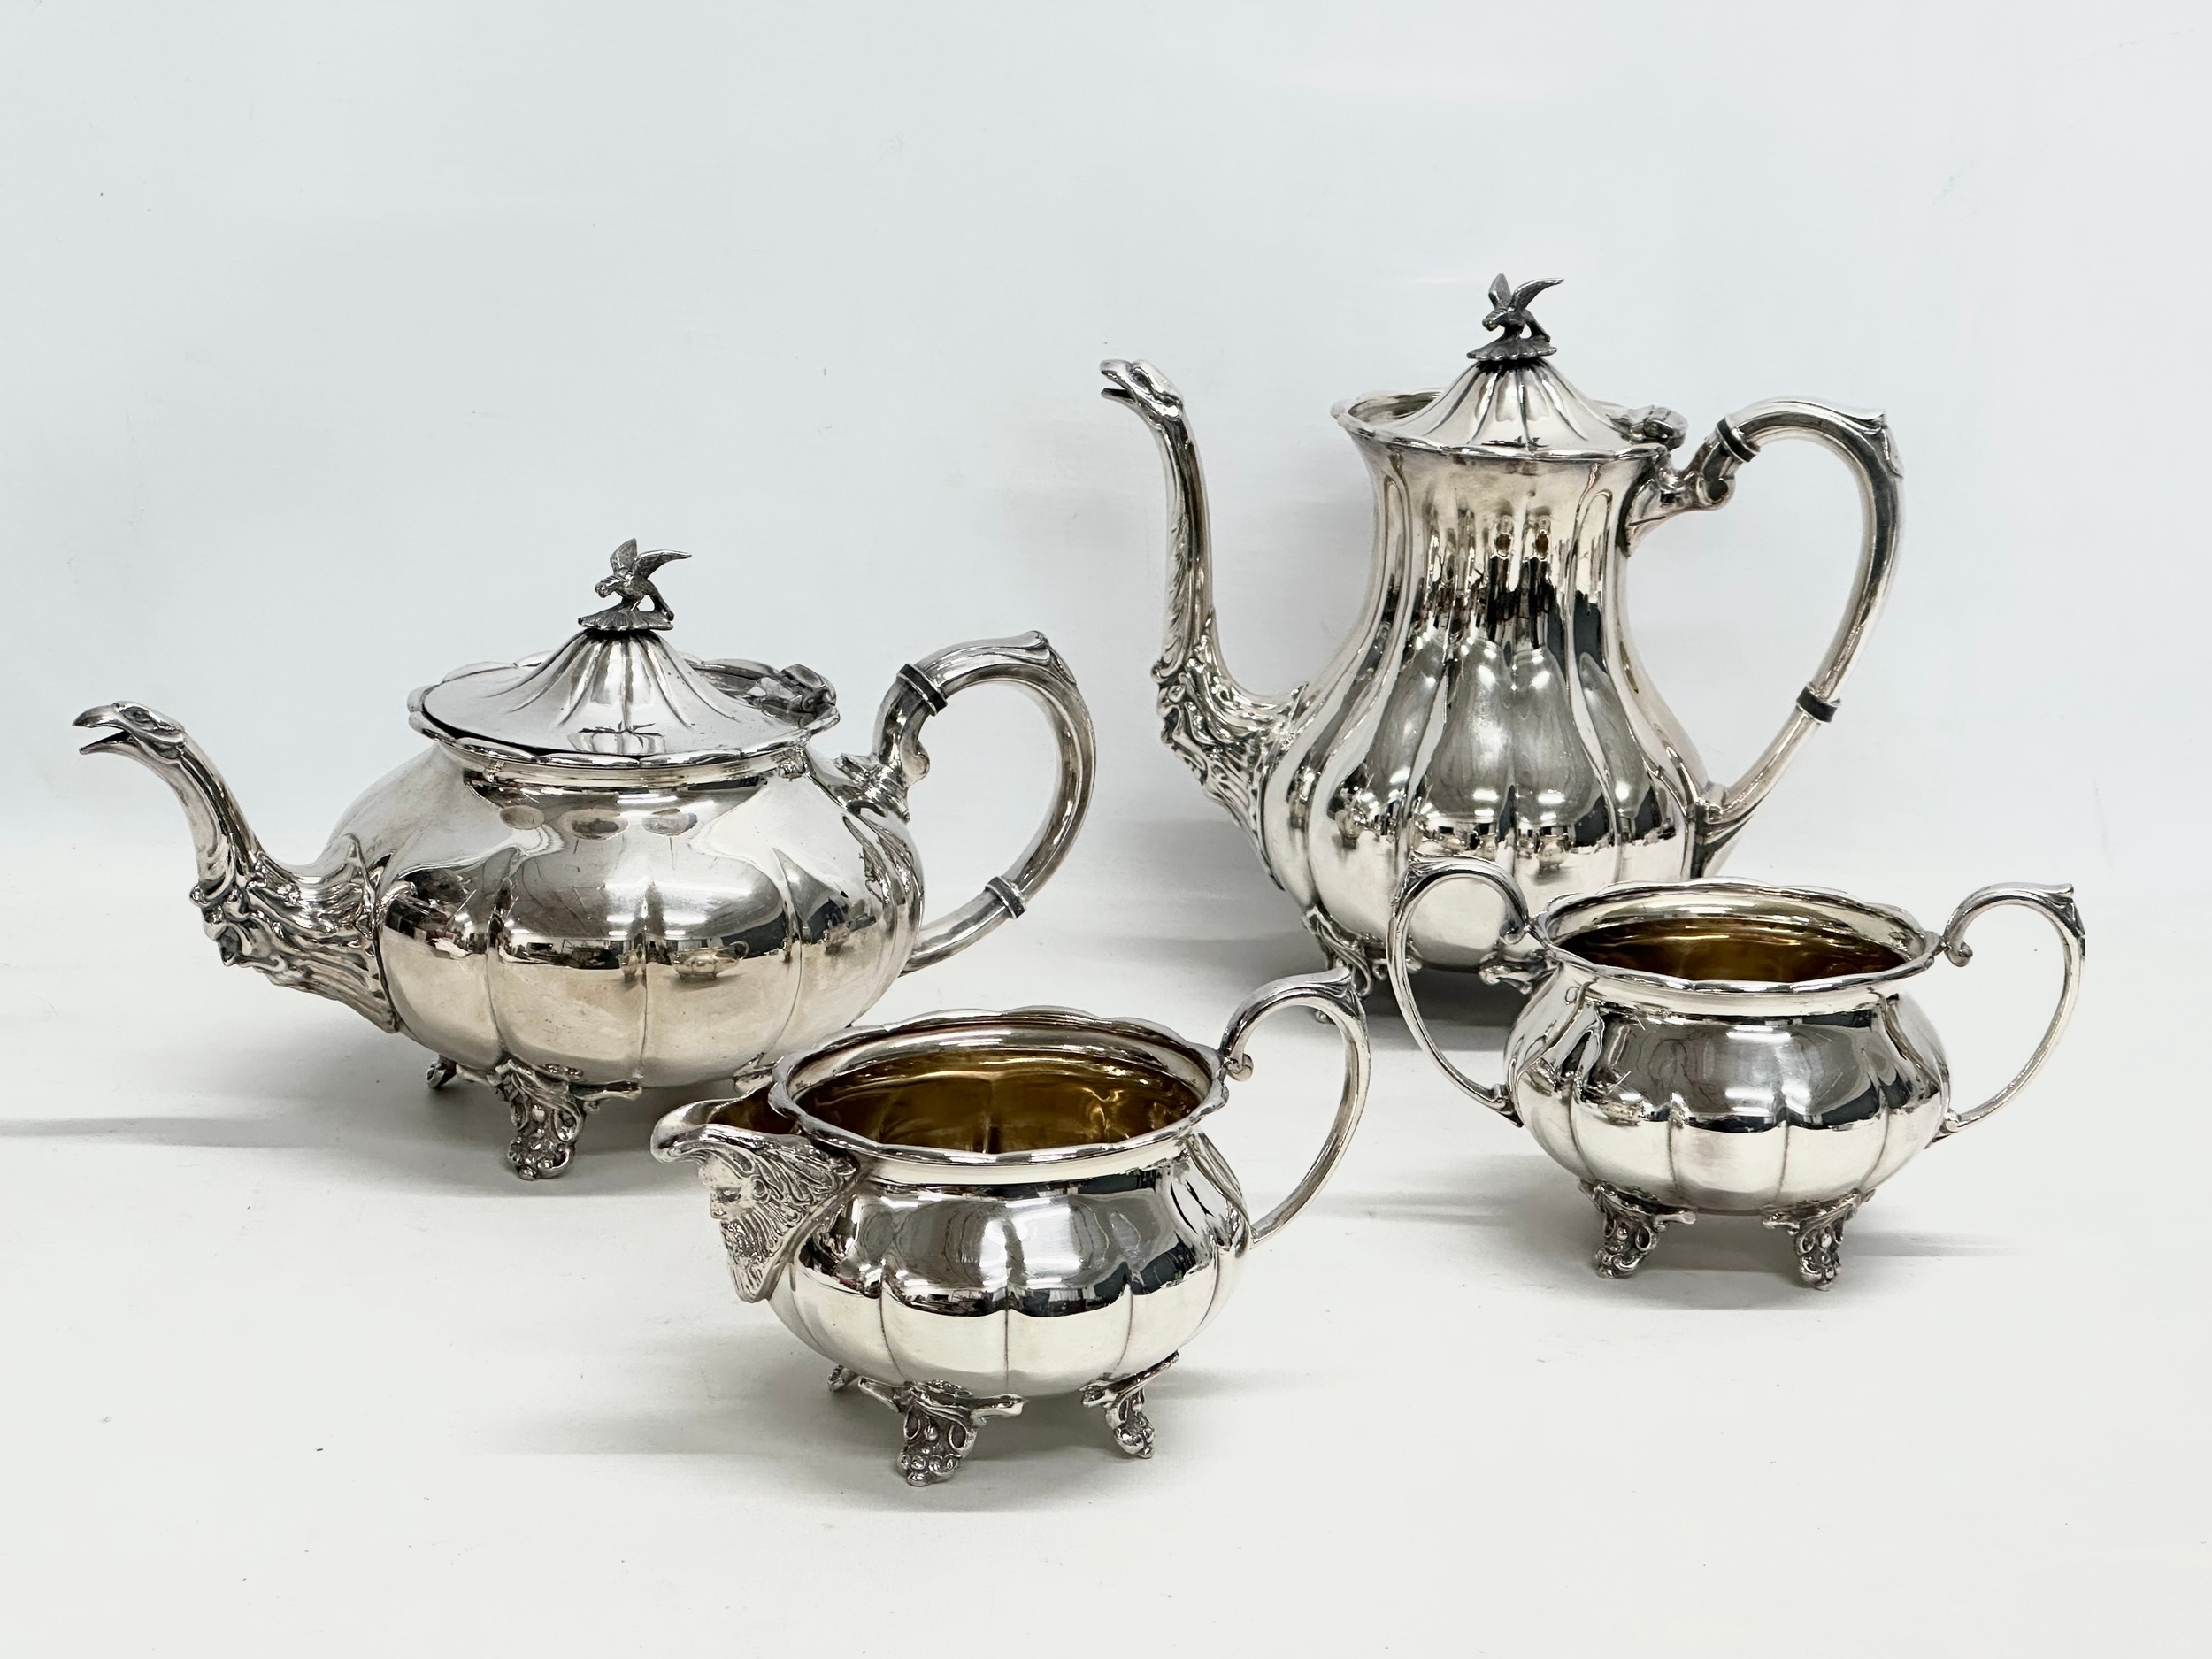 A 4 piece Georgian style silver plated tea service by Cooper Brothers.